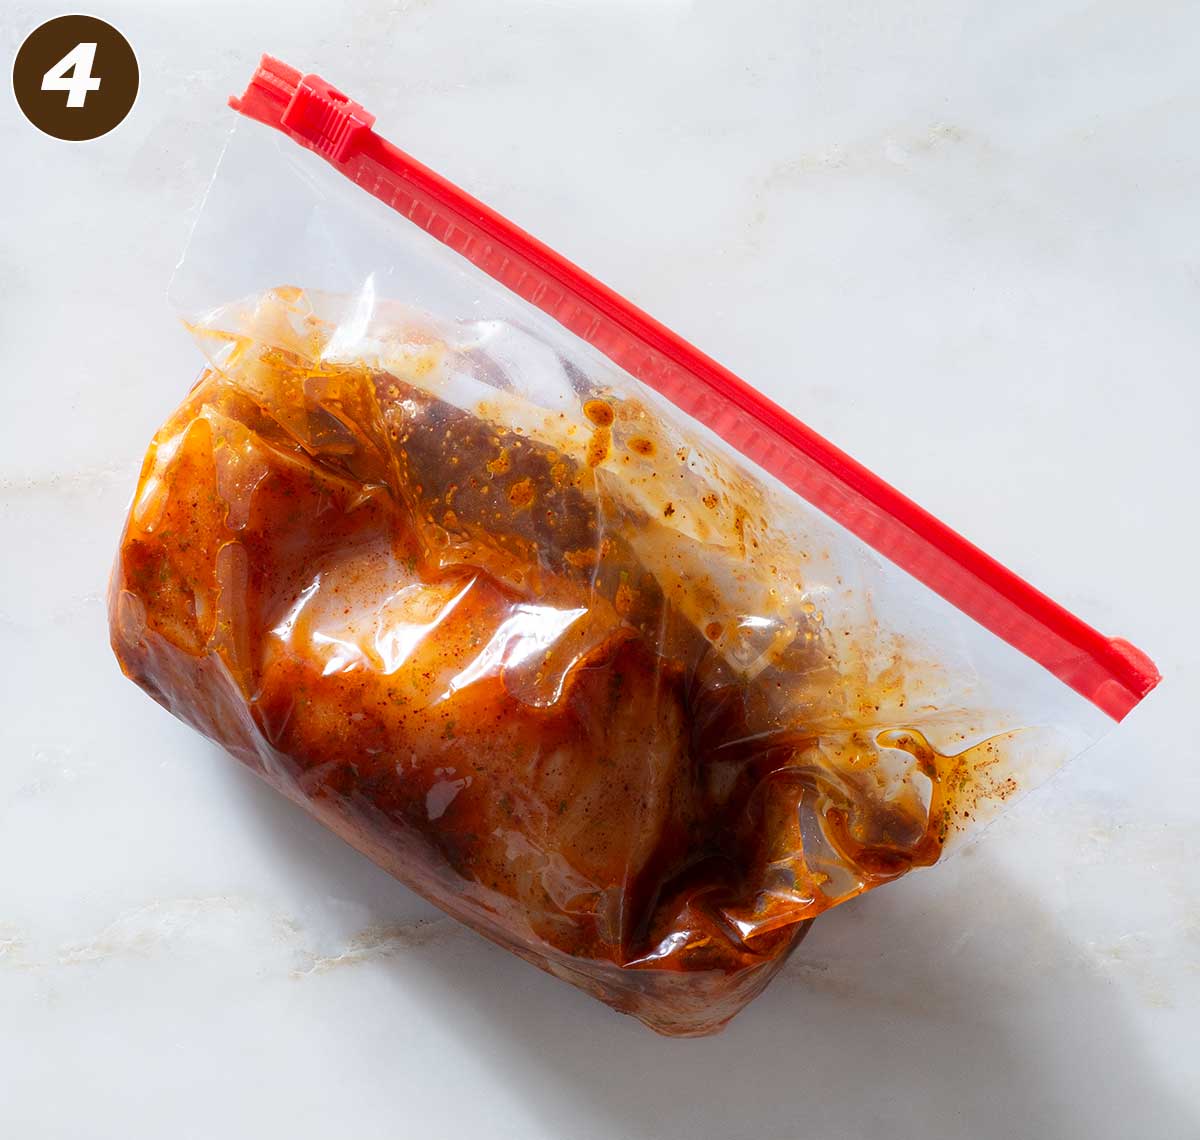 Chicken with marinade in a plastic bag.